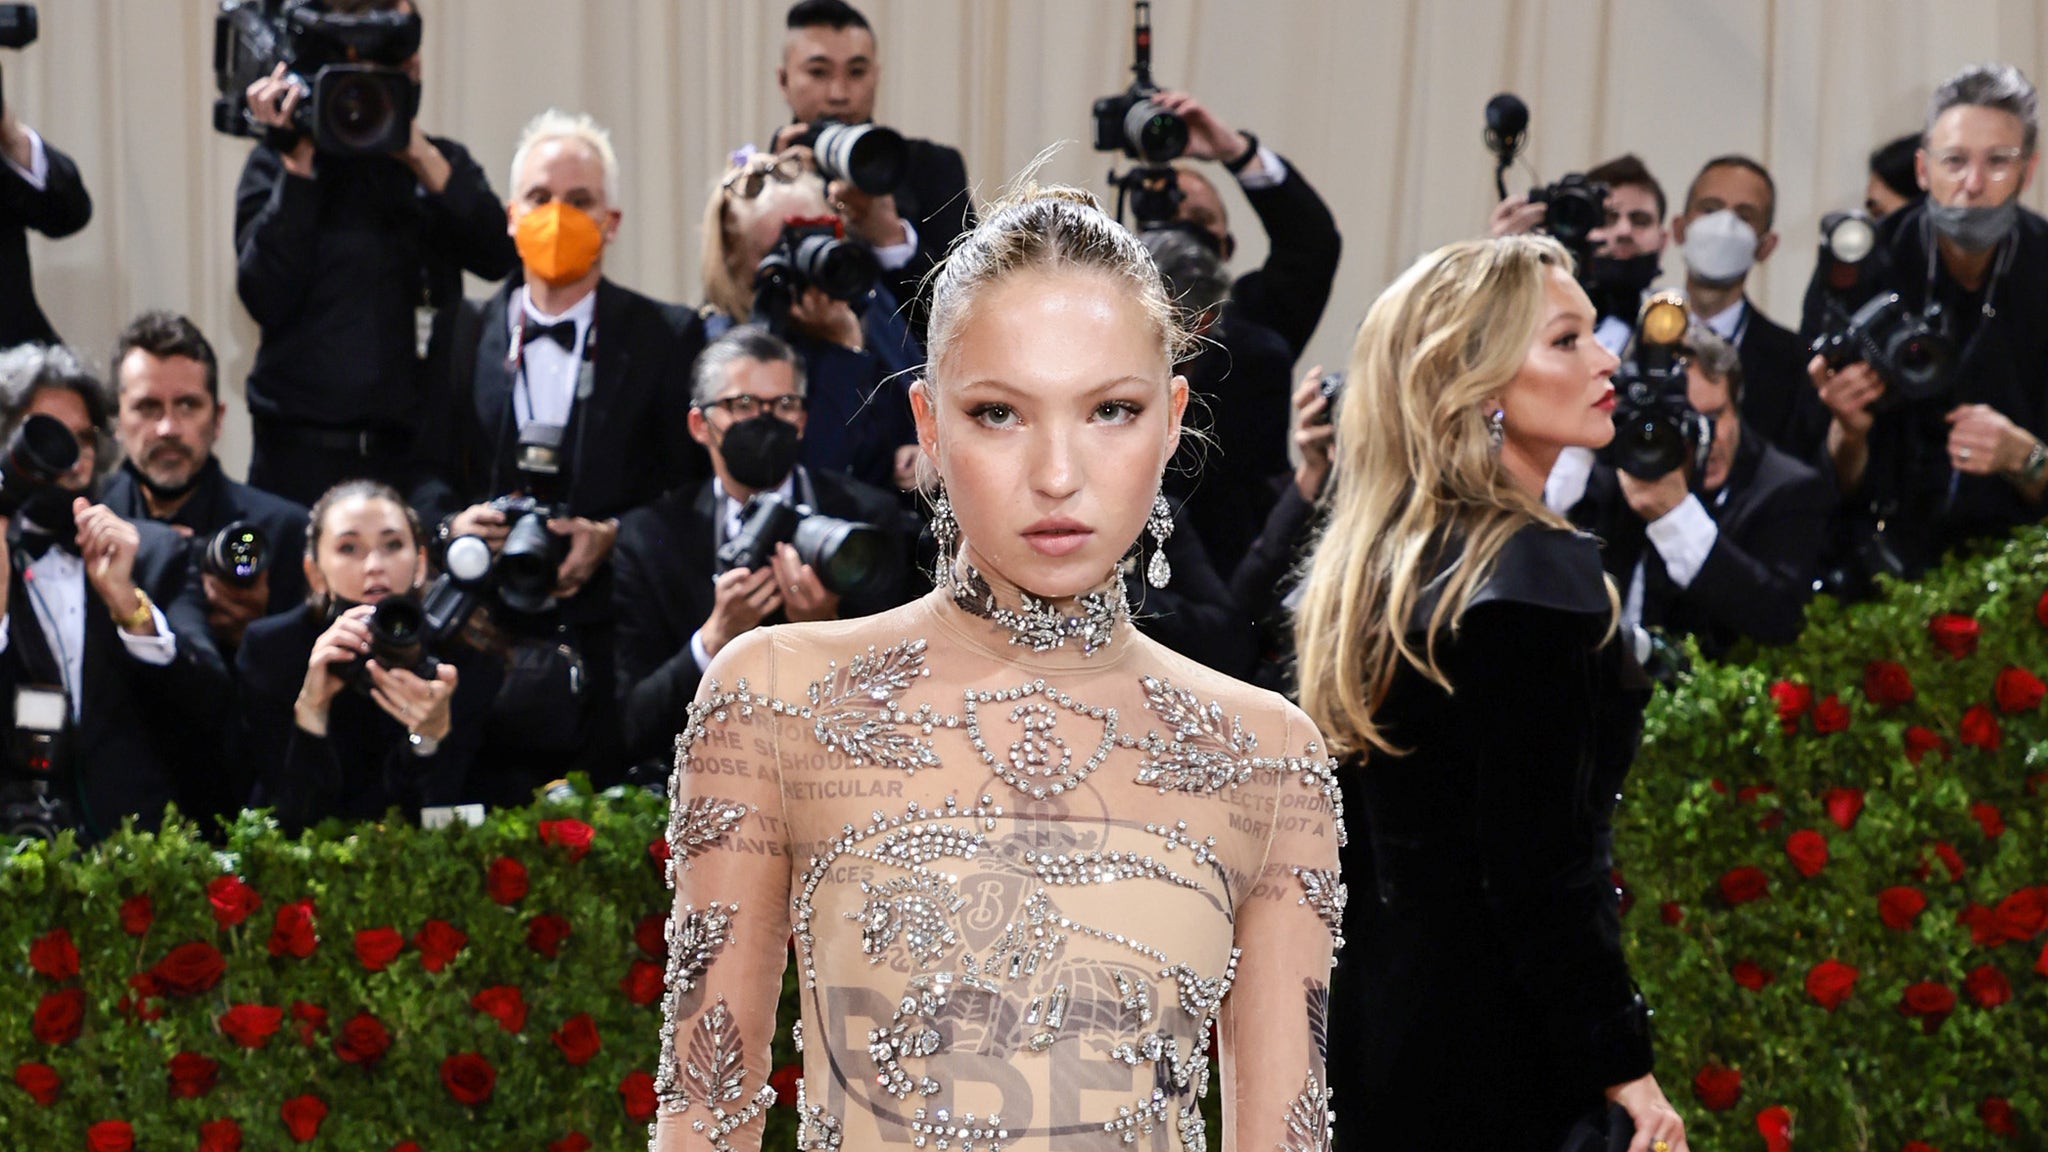 Met Gala 2022: Every Must-See Look From the Red Carpet